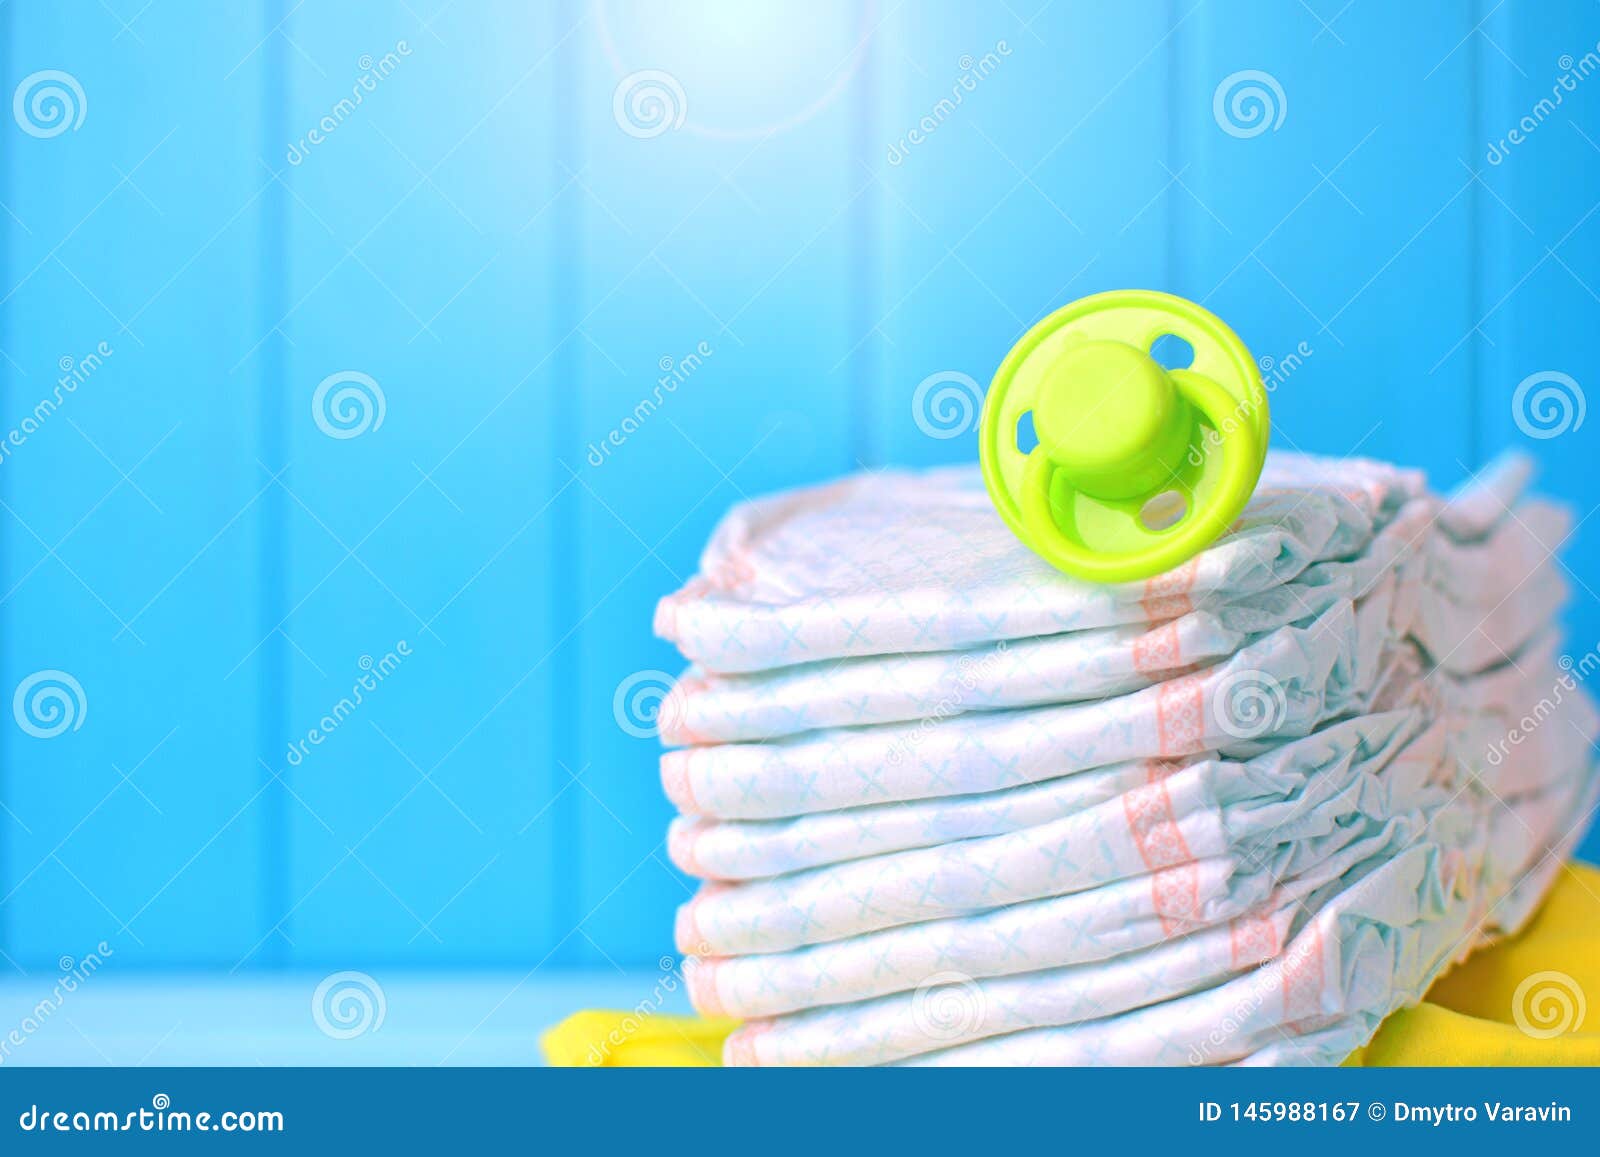 Baby Accessories Background Stock Image - Image of nipple, cleanliness ...